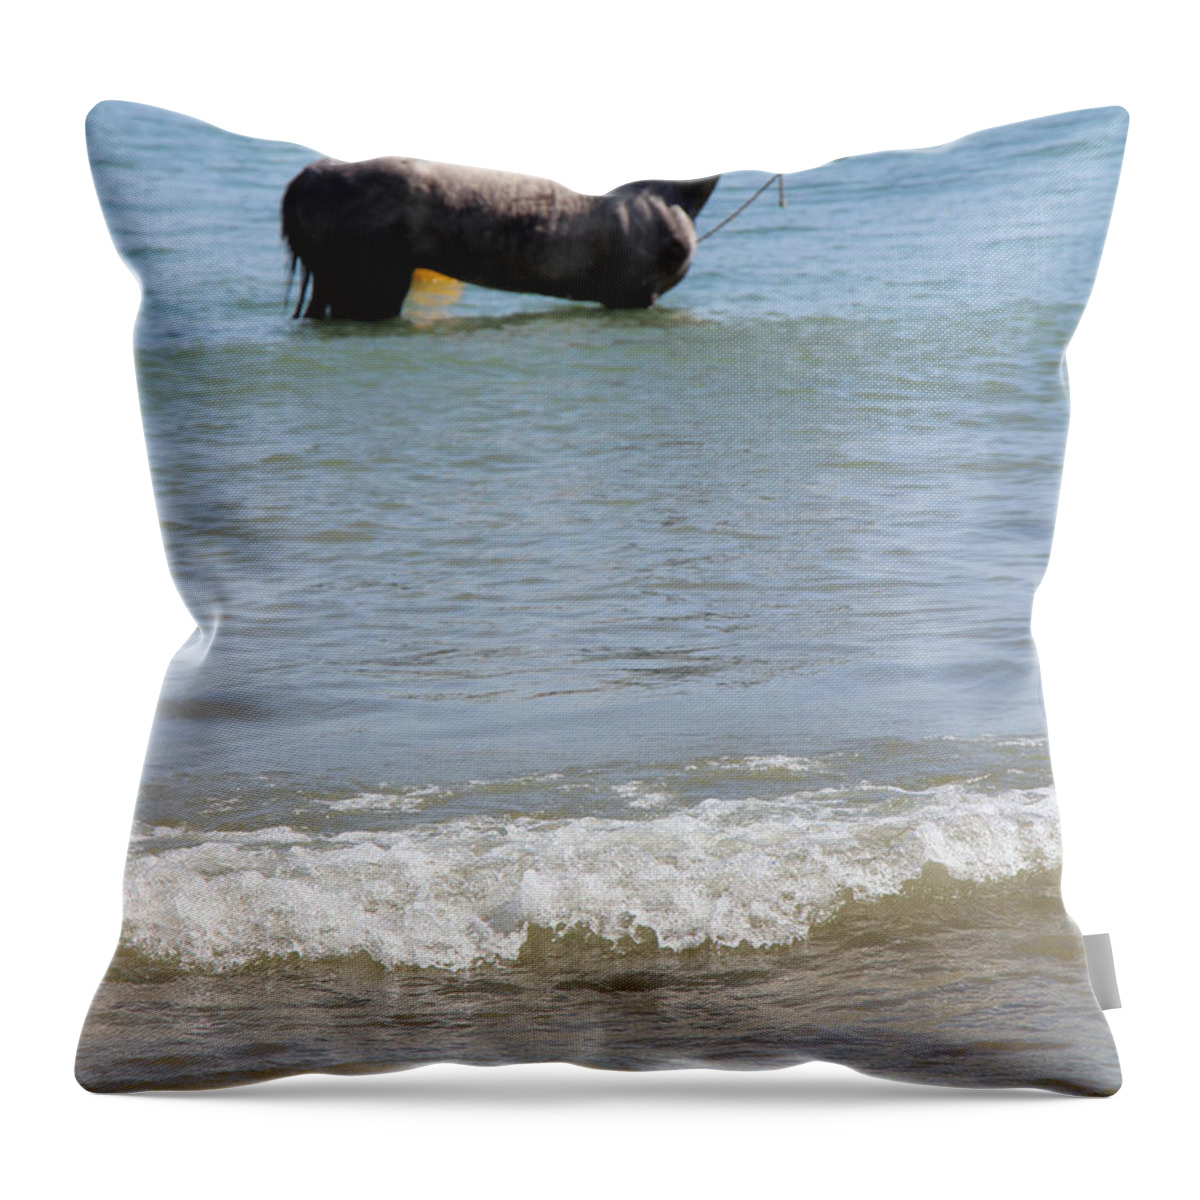 Horse Throw Pillow featuring the photograph Wait Game by Munir Alawi